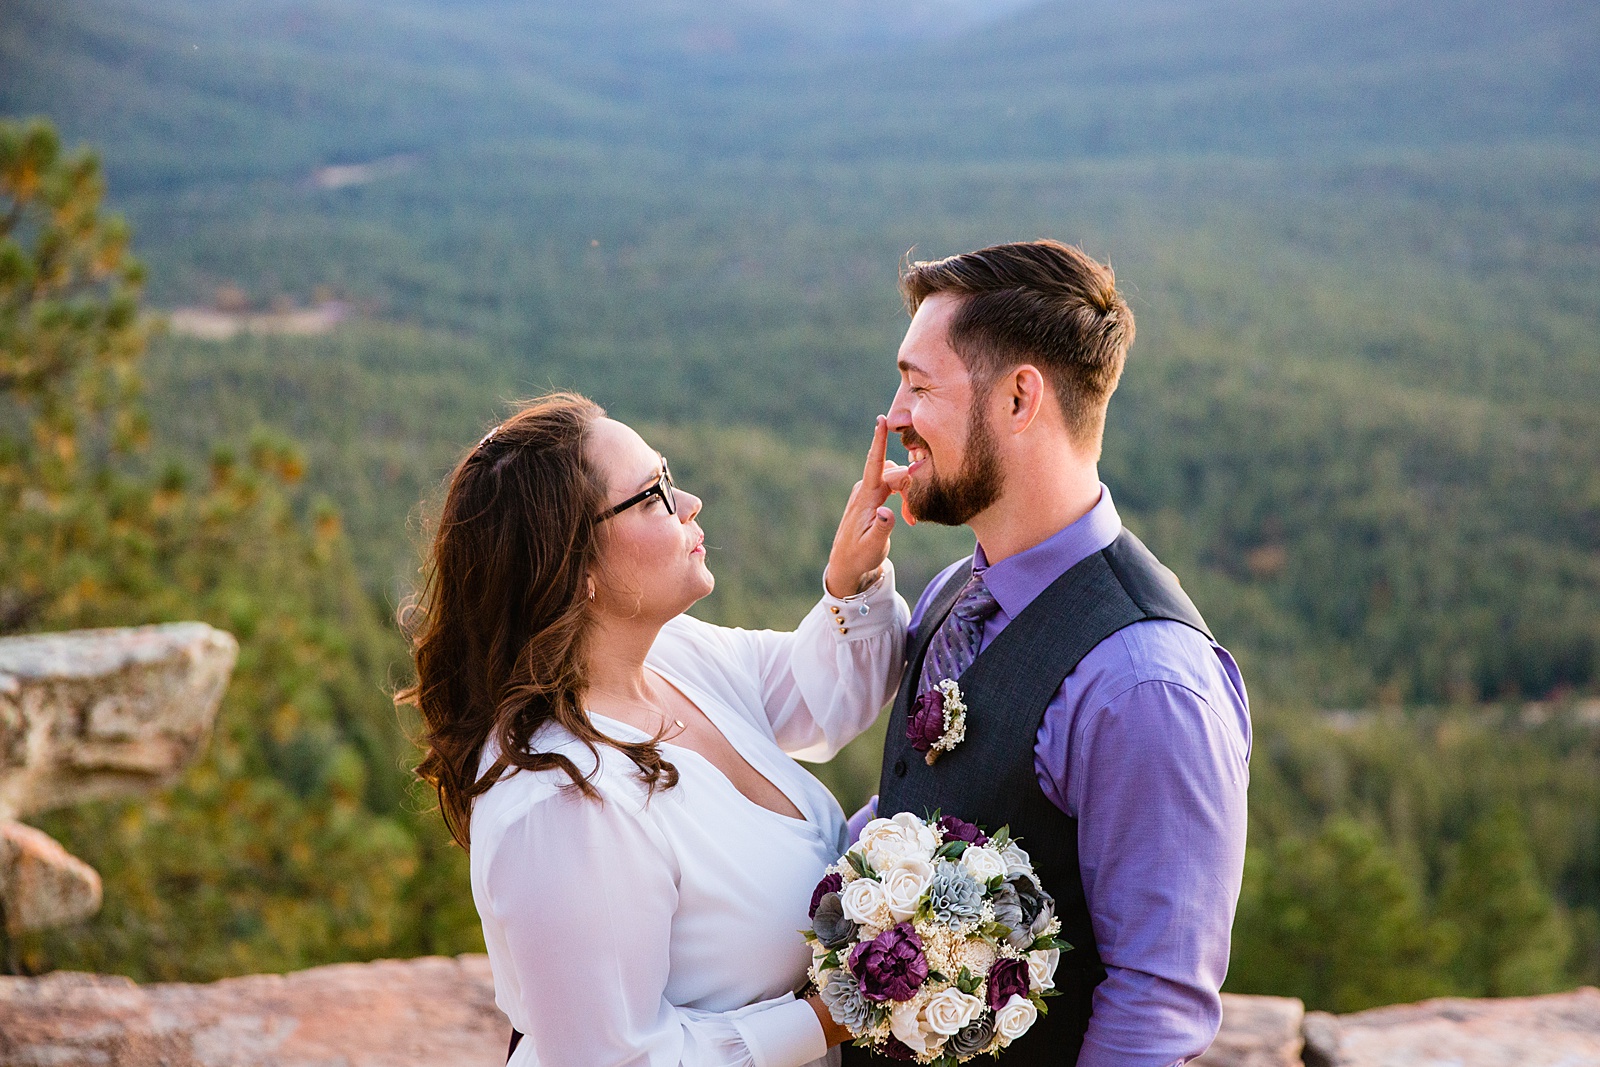 Bride and Groom laughing together during their Mogollon Rim elopement by Arizona elopement photographer PMA Photography.